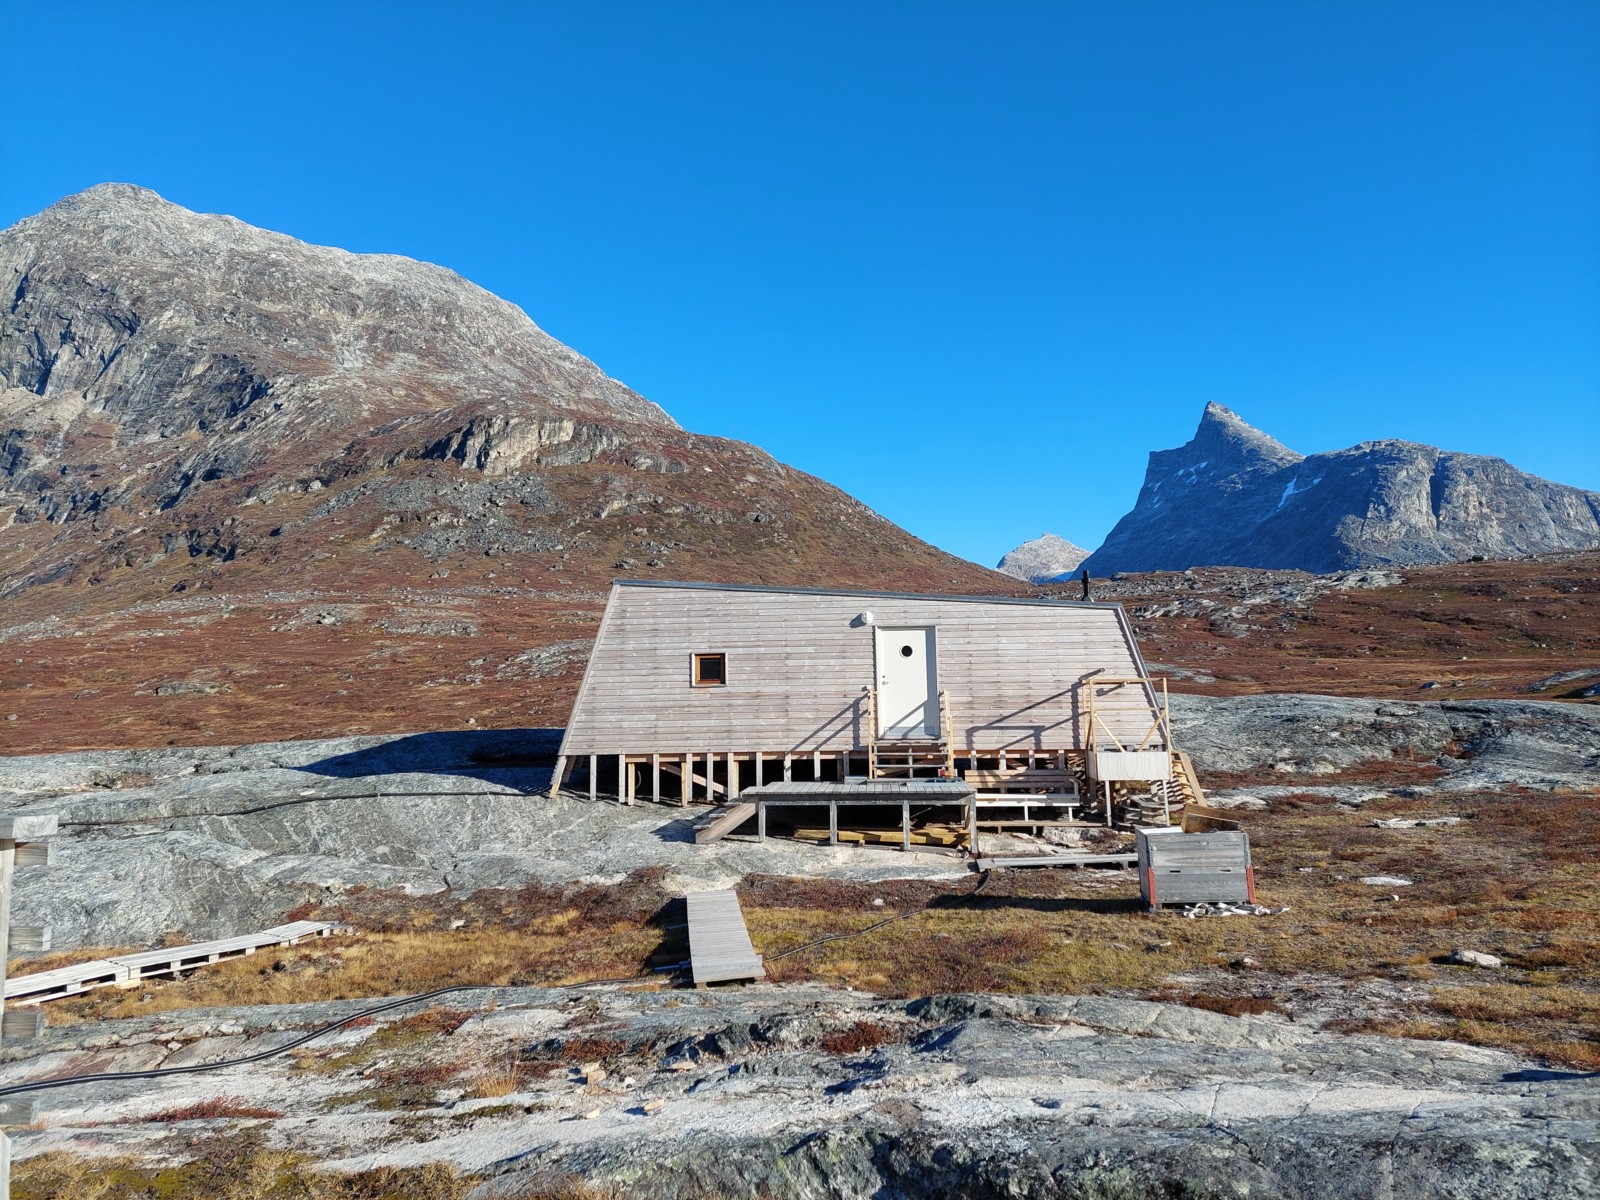 The wooden Kobbefjord research station before bright blue skies and mountains in the background.